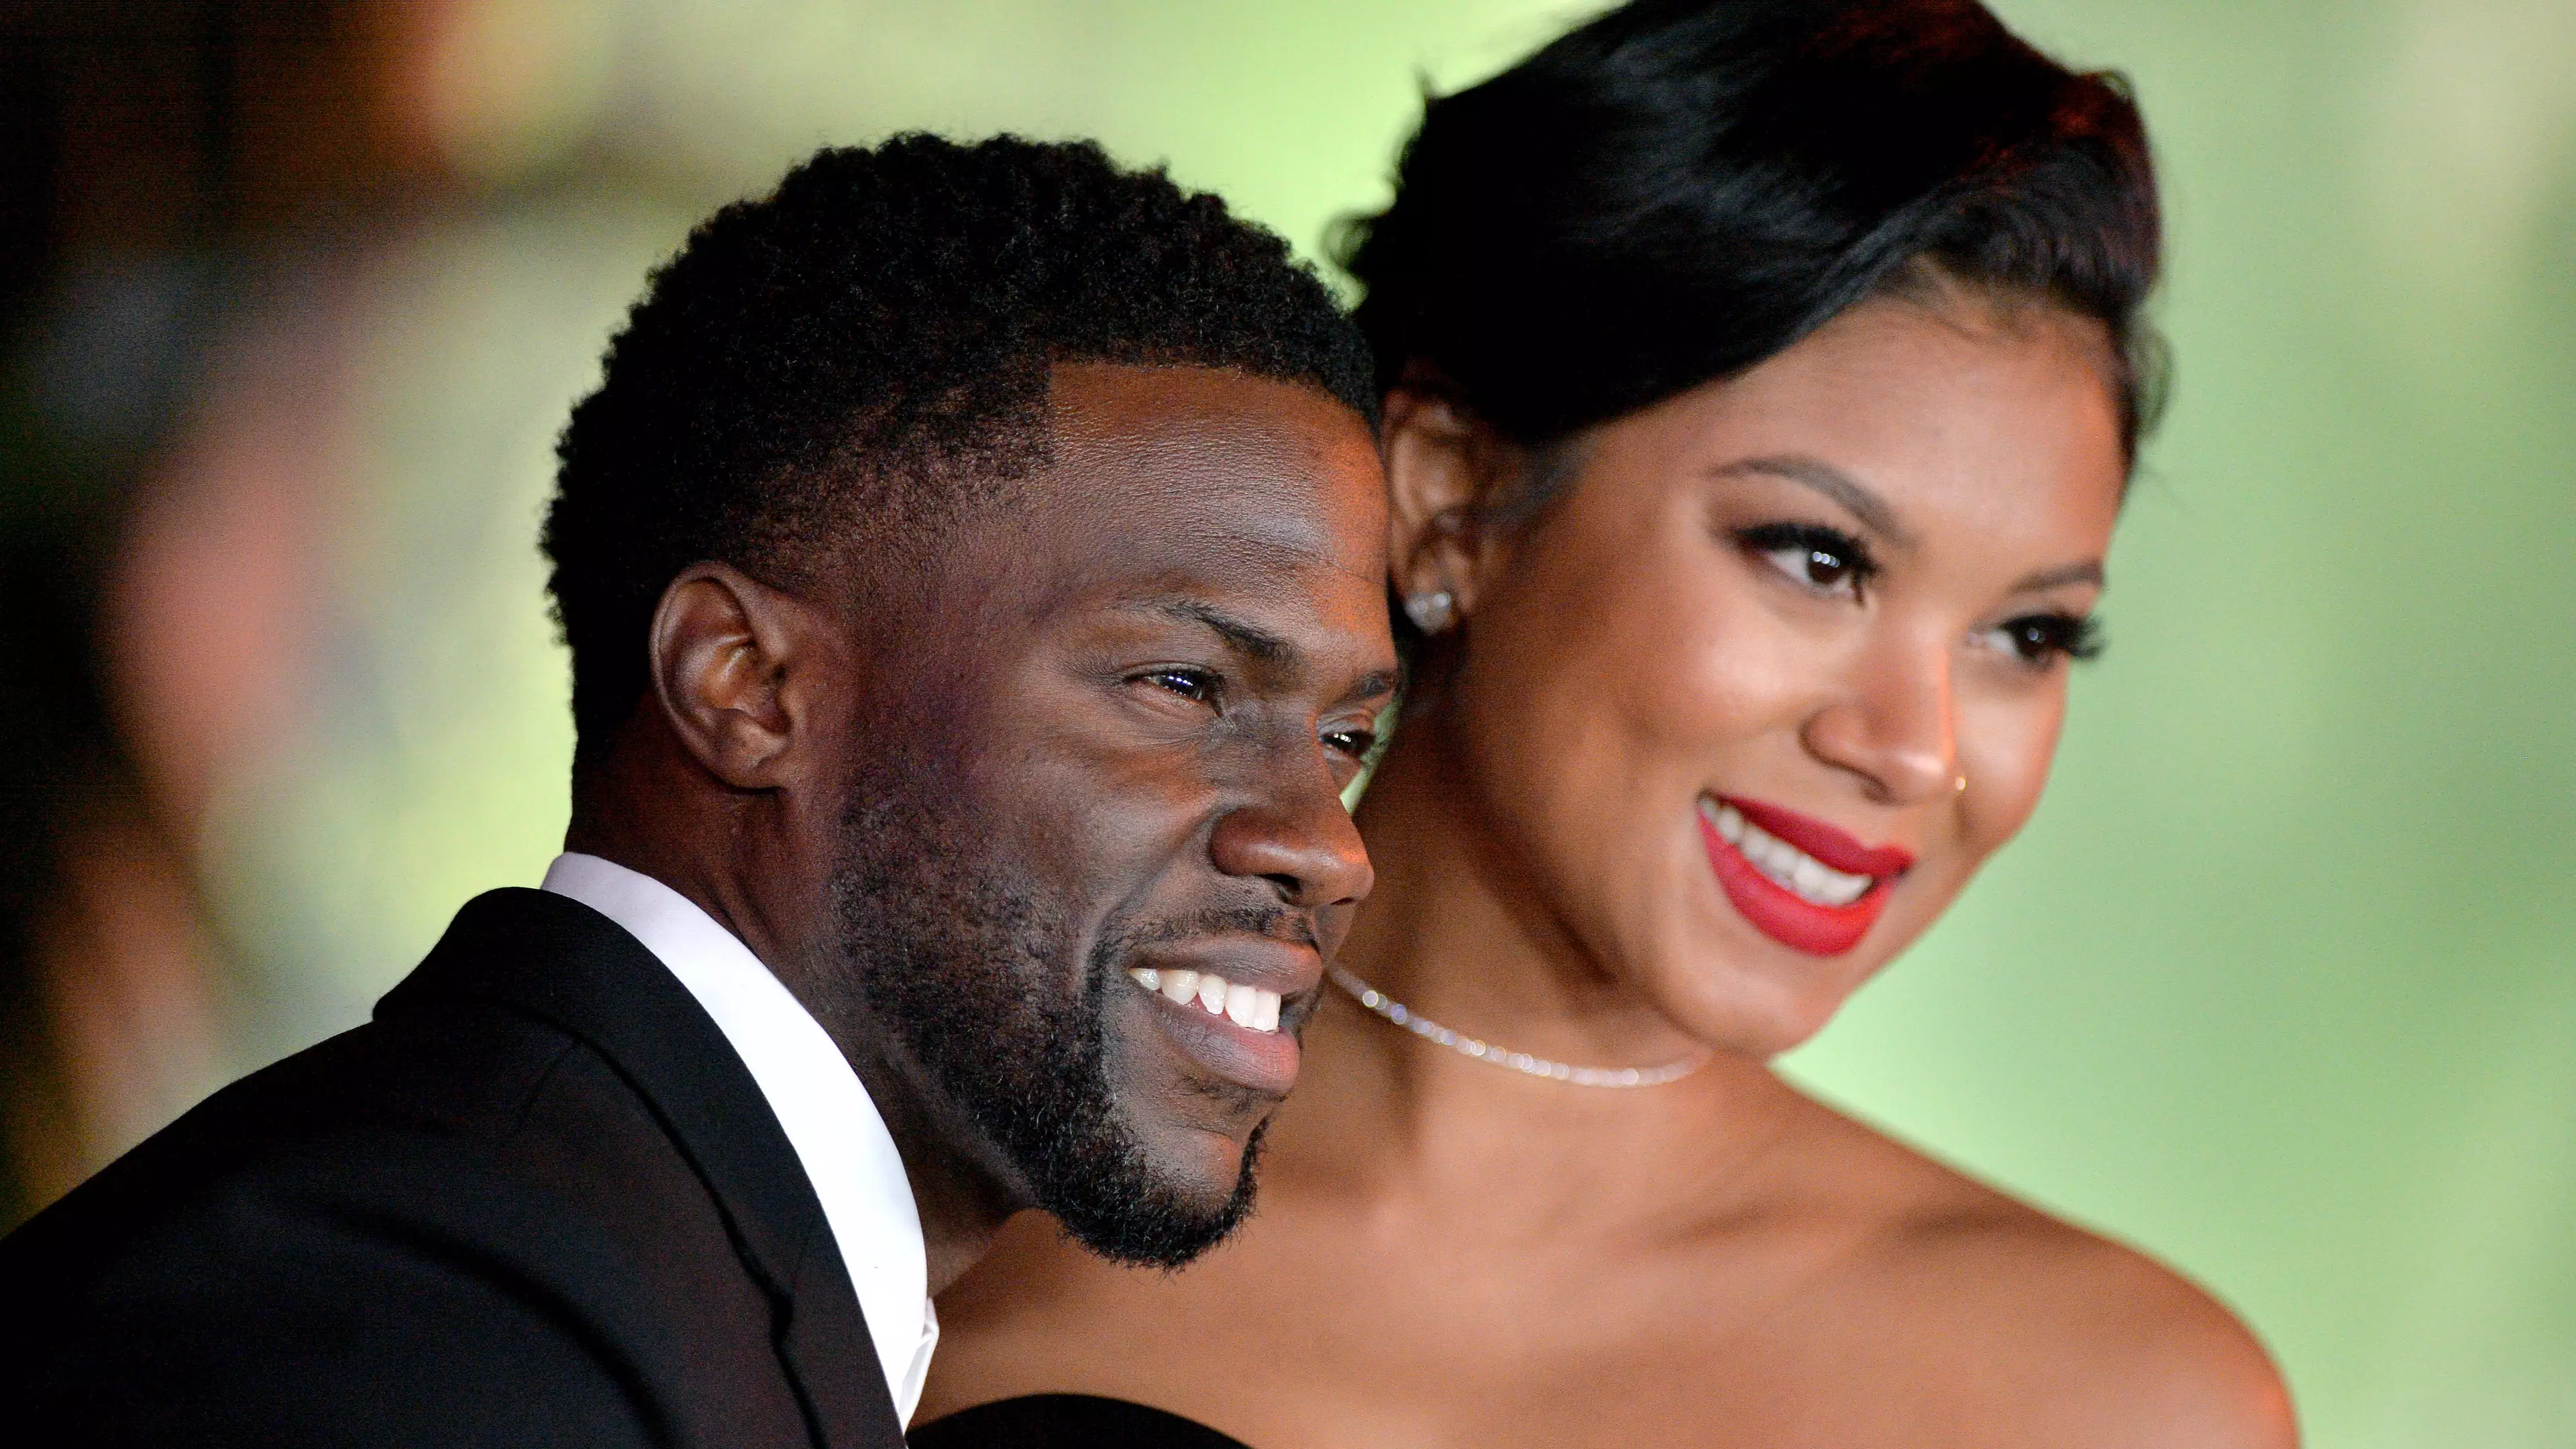 Kevin Hart's Wife Eniko Parrish Reveals She Found Out About His Cheating Via Instagram 